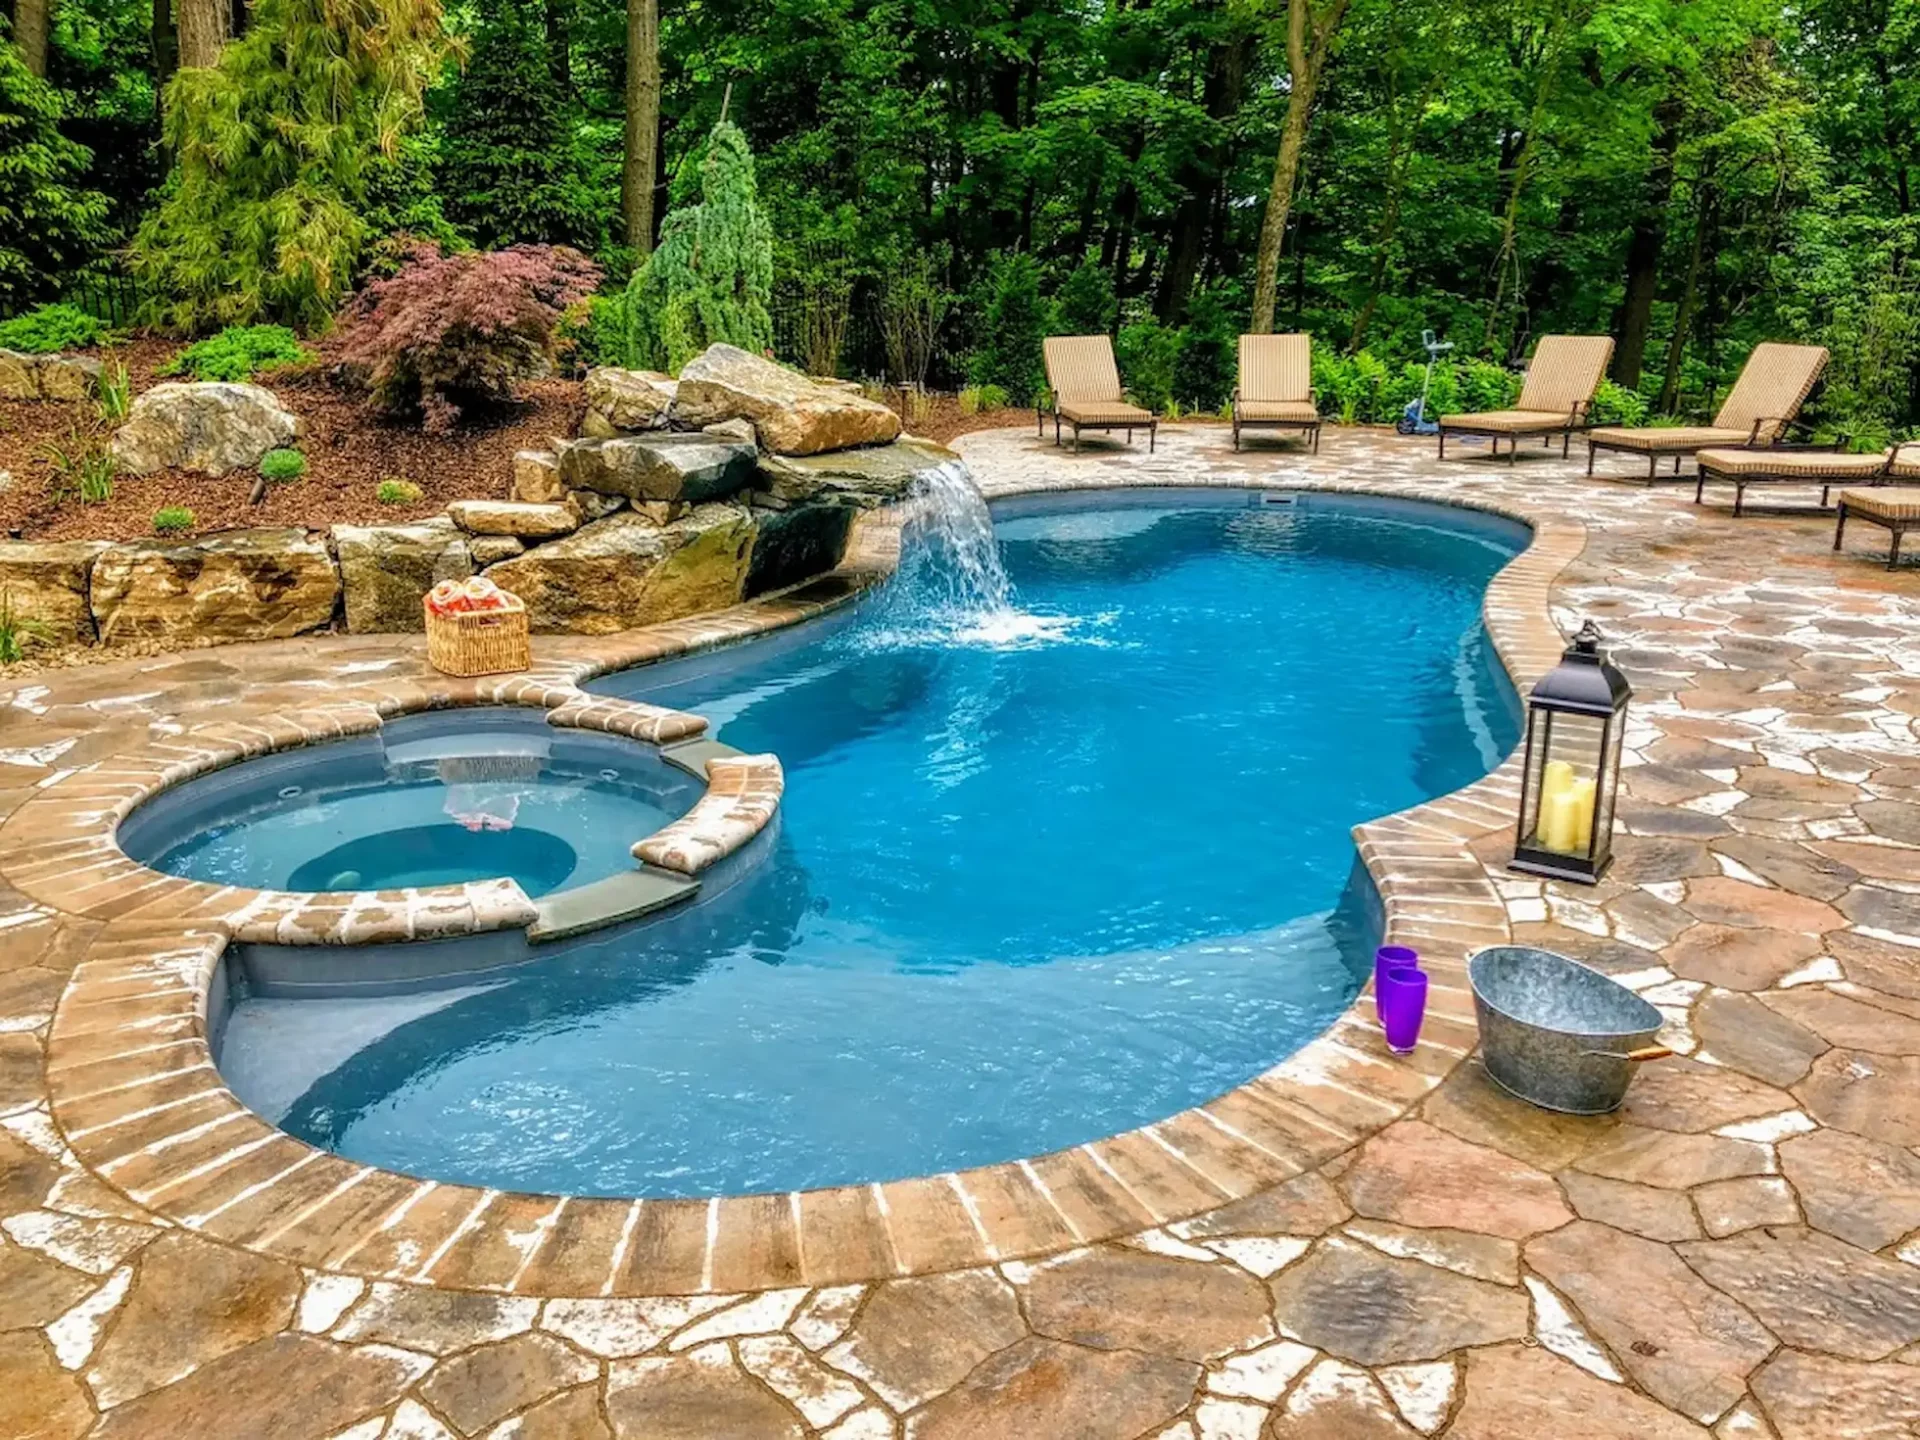 A curvy inground swimming pool with light blue liner sits in the Pennsylvania daylight. Shape and color are two of the design factors to consider when asking "Should I modernize my swimming pool with something trendy or classic?"